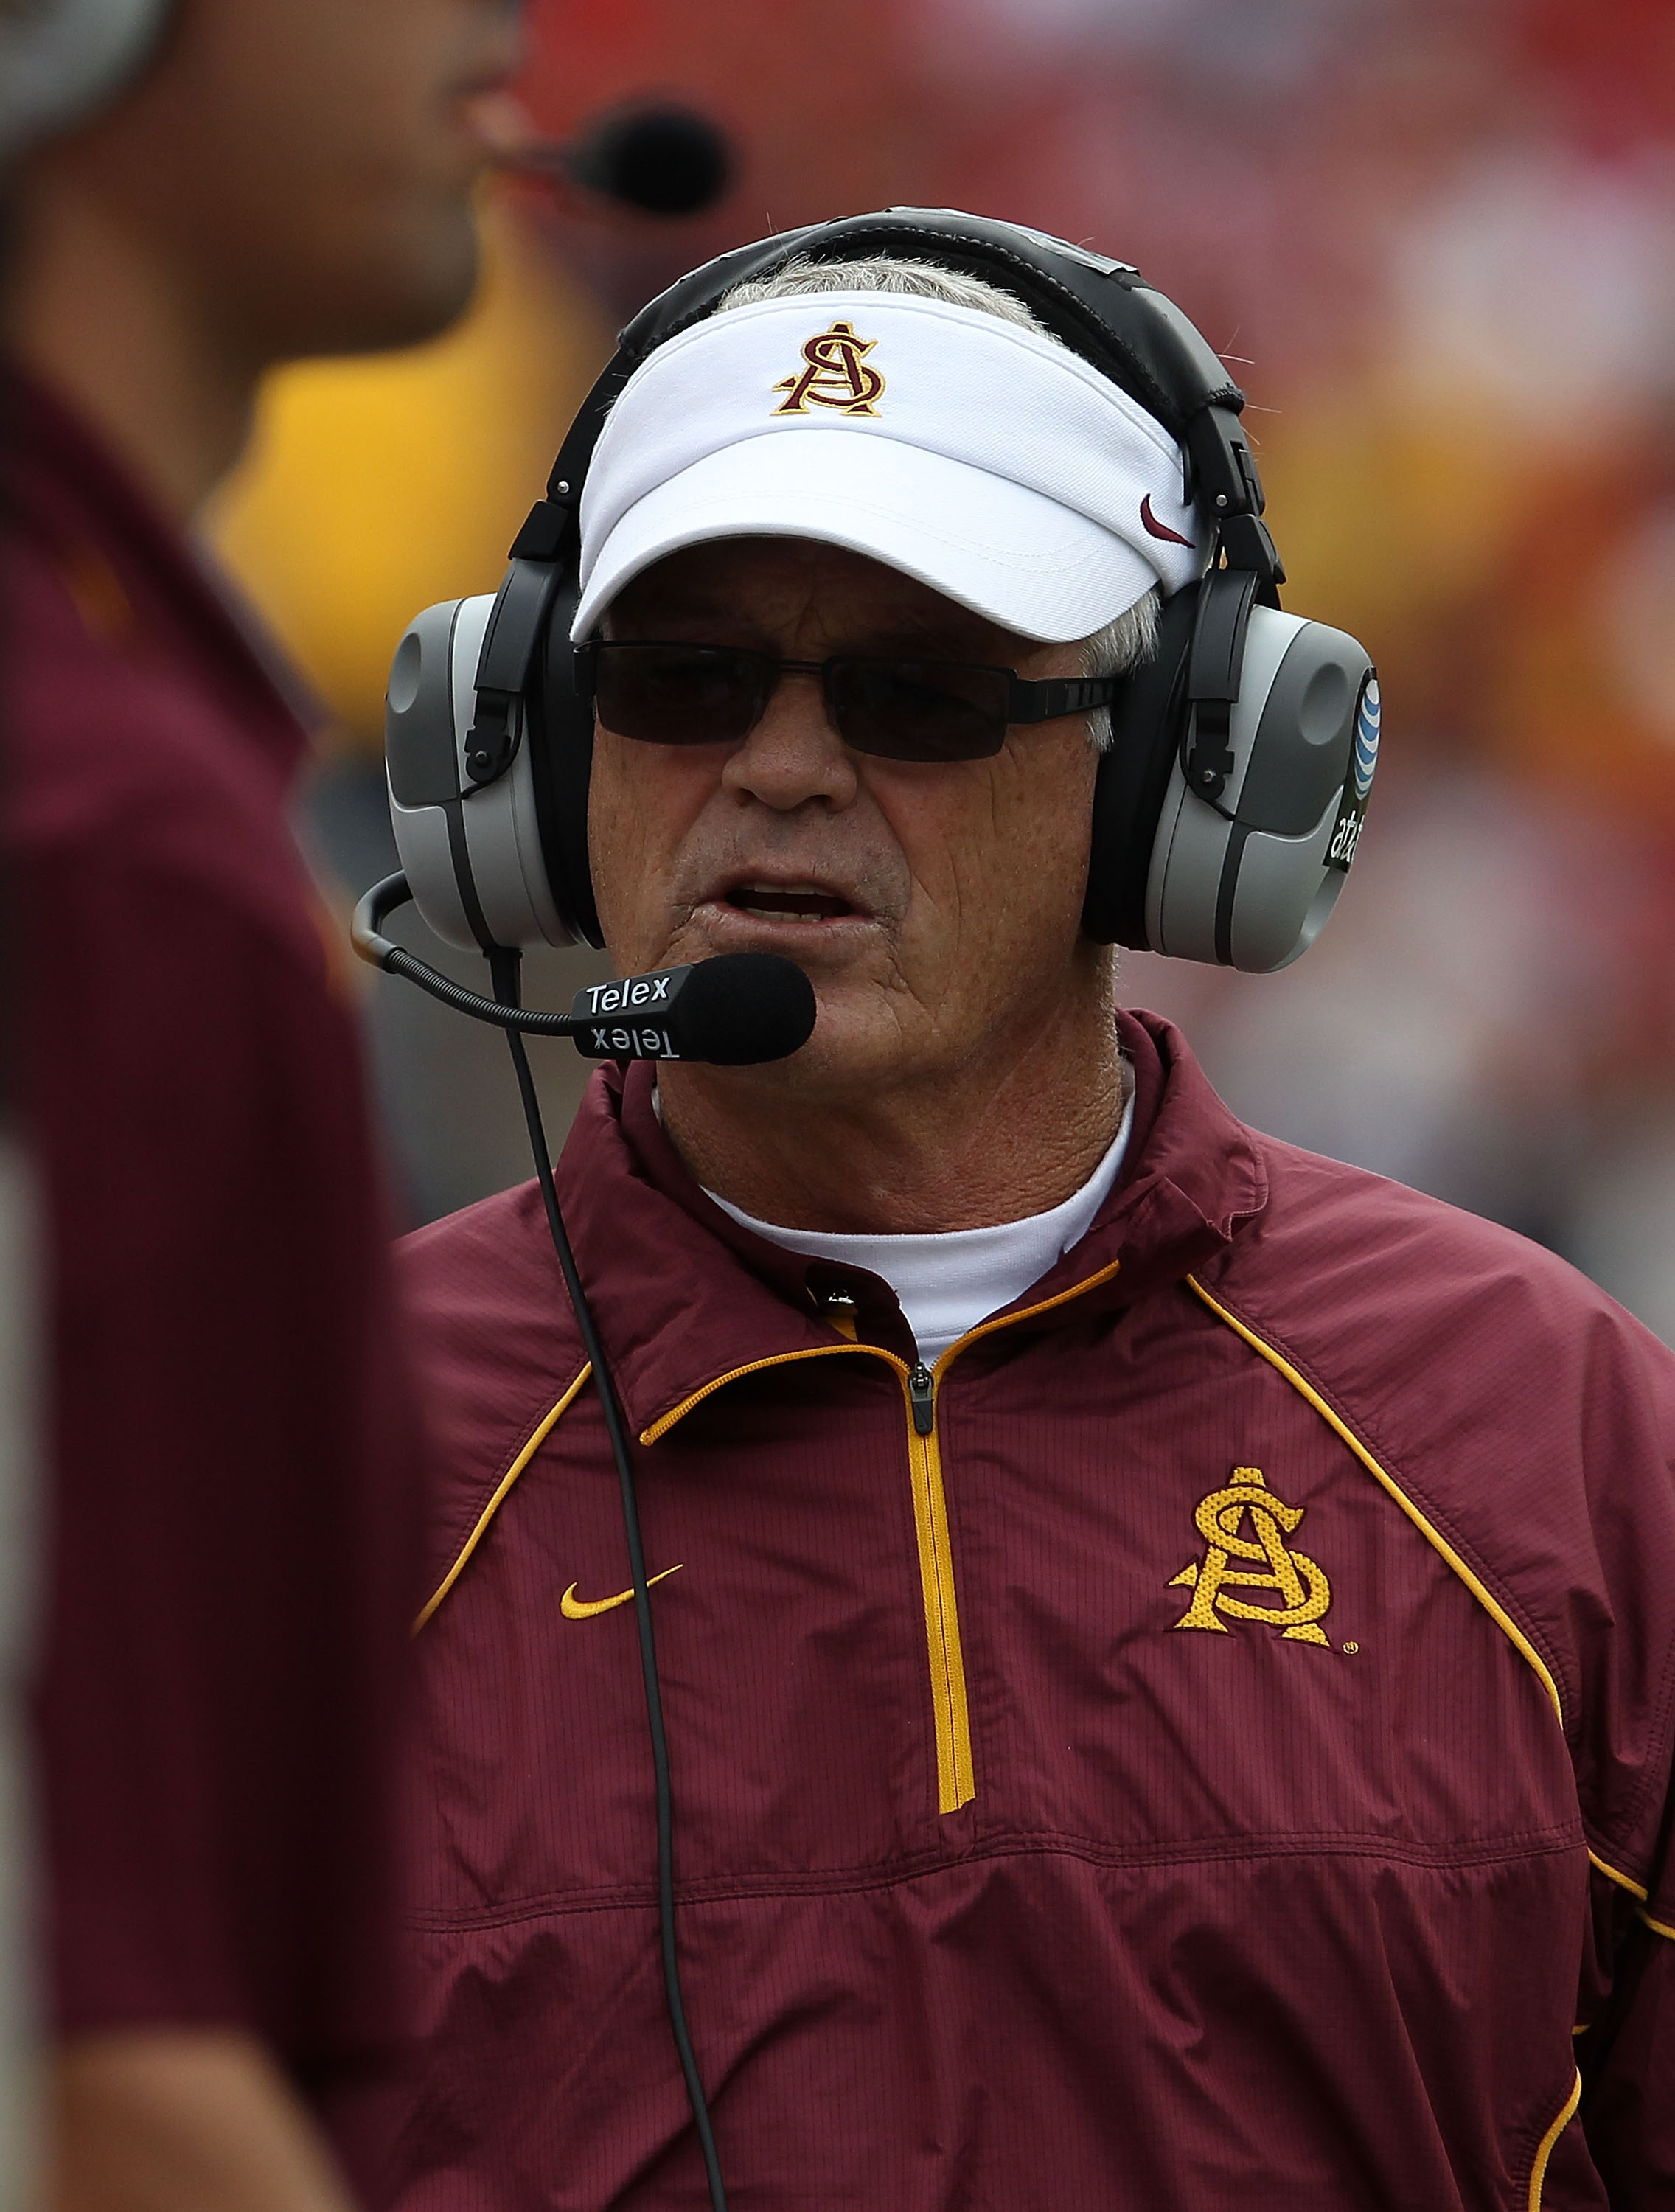 MADISON, WI - SEPTEMBER 18: Head coach Dennis Erickson of the Arizona State Sun Devils argues with a referee during a game against the Wisconsin Badgers at Camp Randall Stadium on September 18, 2010 in Madison, Wisconsin. Wisconsin defeated Arizona State